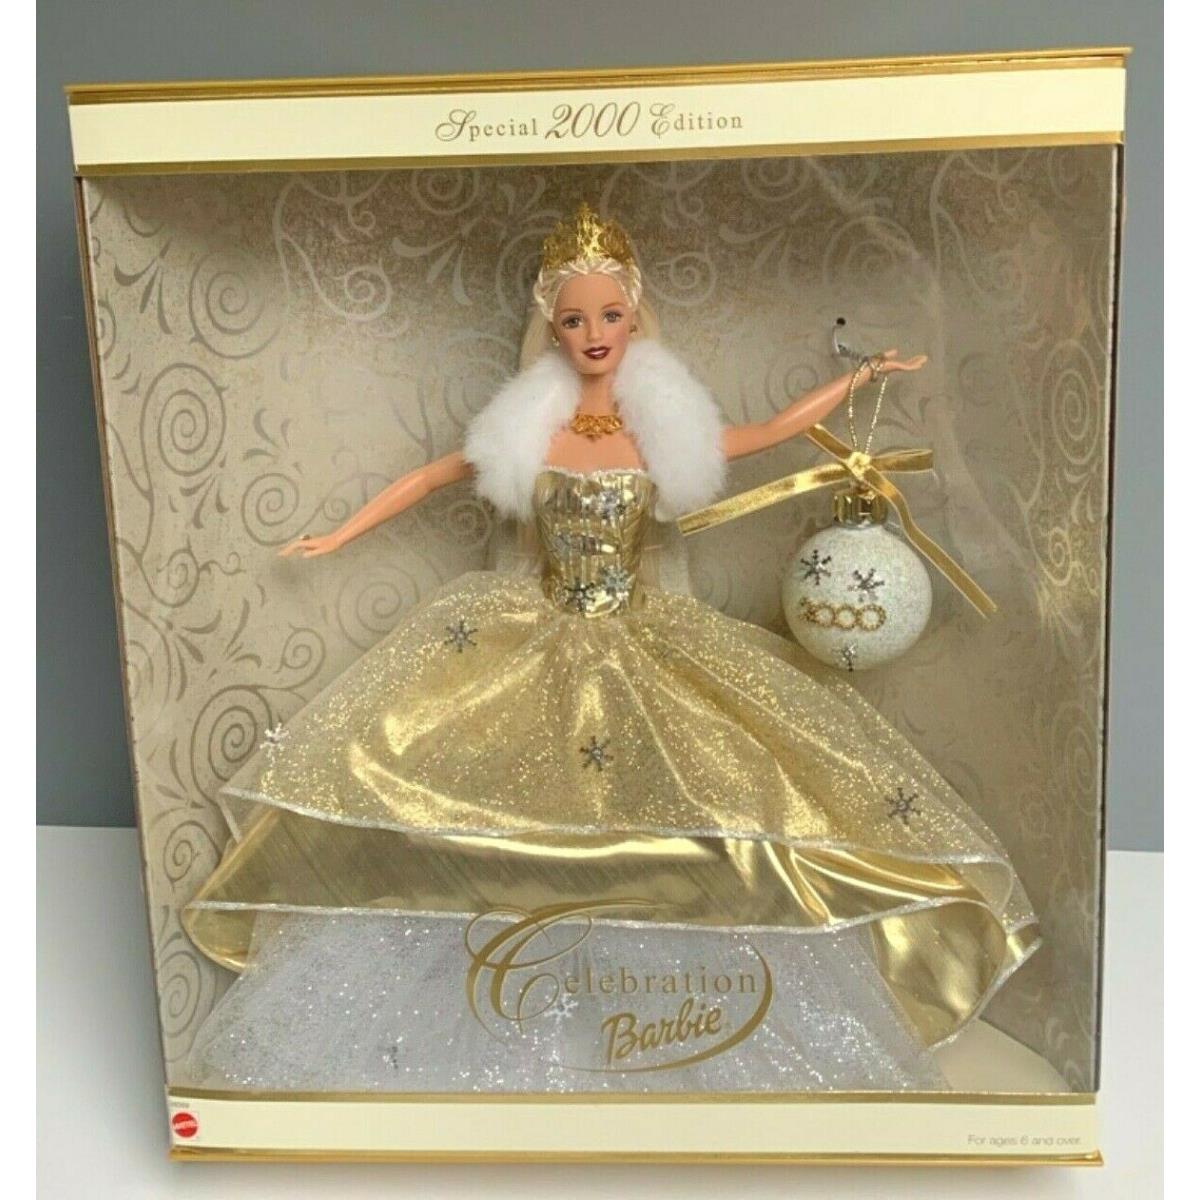 Celebration Barbie Doll Mattel Special Edition 2000 with Christmas Ornament